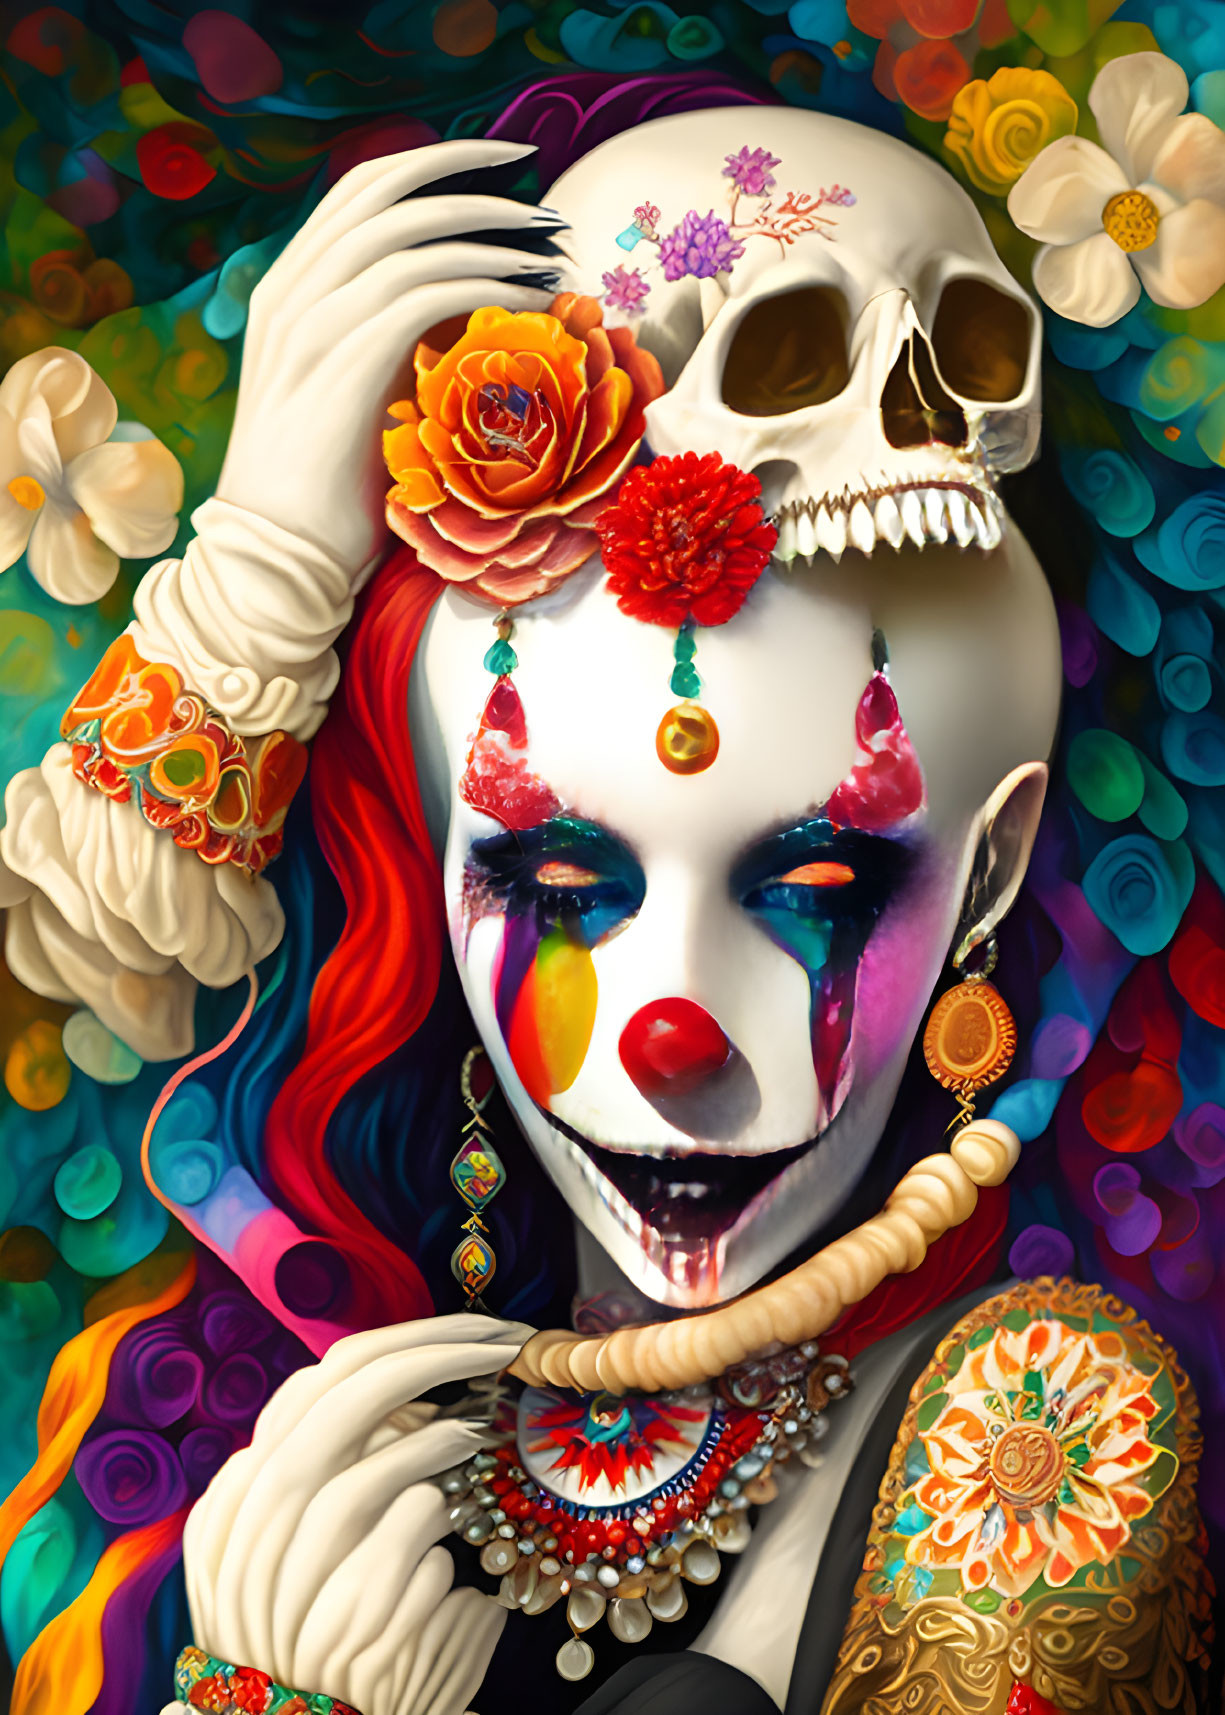 Colorful Day of the Dead-themed person illustration with skull face paint and floral accessories.